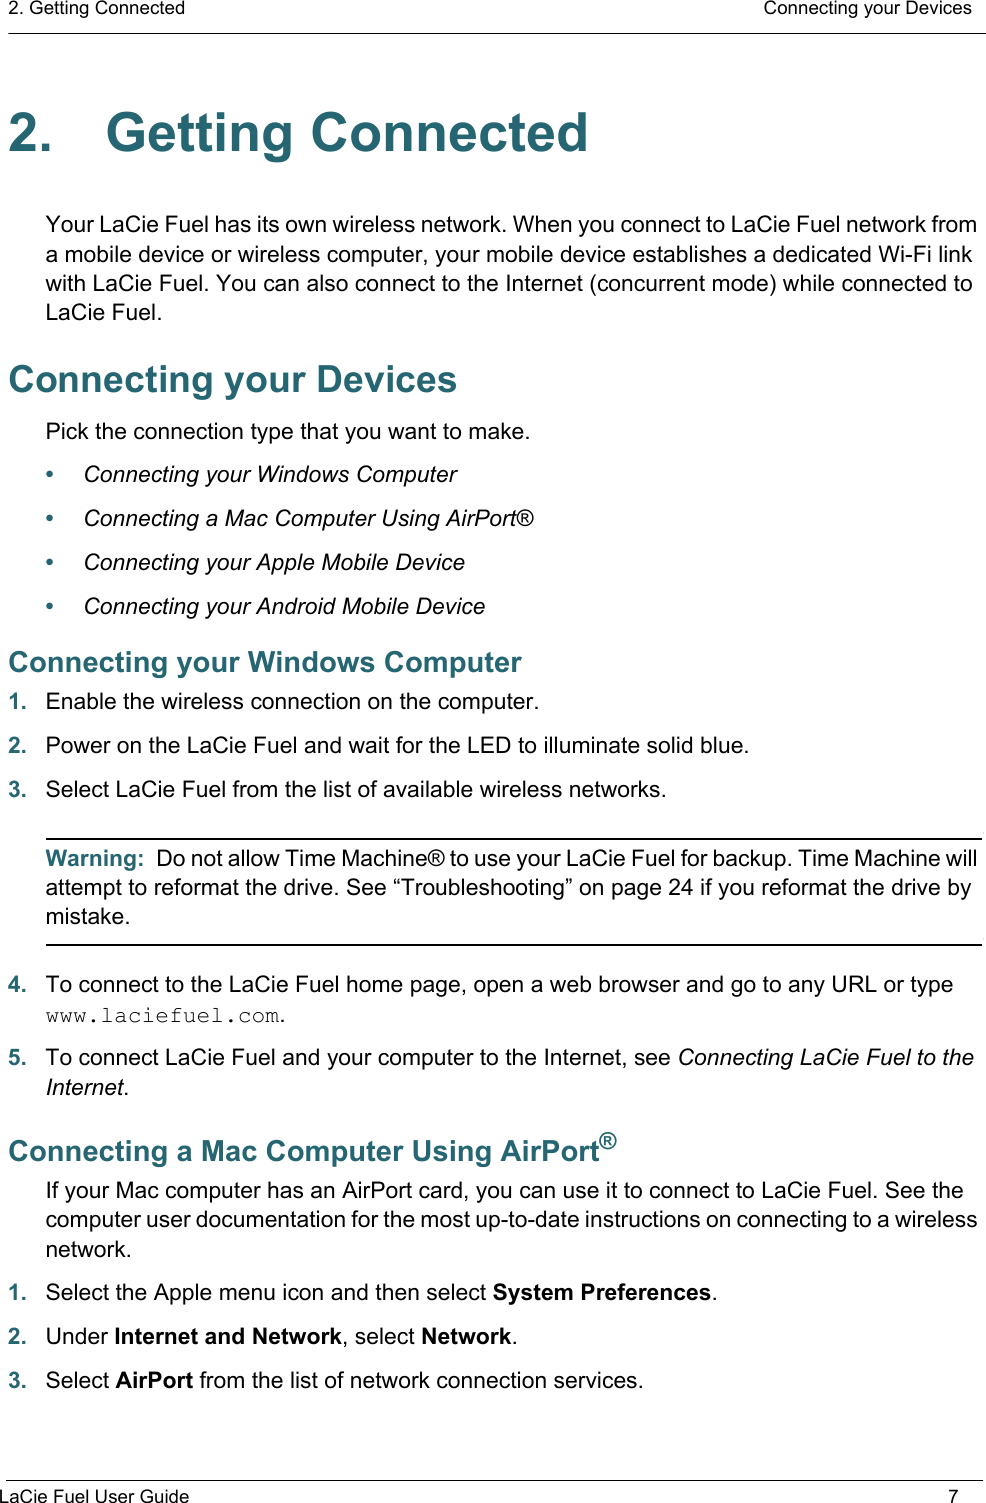 2. Getting Connected  Connecting your DevicesLaCie Fuel User Guide 72. Getting ConnectedYour LaCie Fuel has its own wireless network. When you connect to LaCie Fuel network from a mobile device or wireless computer, your mobile device establishes a dedicated Wi-Fi link with LaCie Fuel. You can also connect to the Internet (concurrent mode) while connected to LaCie Fuel.Connecting your DevicesPick the connection type that you want to make.•Connecting your Windows Computer•Connecting a Mac Computer Using AirPort®•Connecting your Apple Mobile Device•Connecting your Android Mobile DeviceConnecting your Windows Computer1. Enable the wireless connection on the computer.2. Power on the LaCie Fuel and wait for the LED to illuminate solid blue.3. Select LaCie Fuel from the list of available wireless networks.Warning:  Do not allow Time Machine® to use your LaCie Fuel for backup. Time Machine will attempt to reformat the drive. See “Troubleshooting” on page 24 if you reformat the drive by mistake.4. To connect to the LaCie Fuel home page, open a web browser and go to any URL or type www.laciefuel.com.5. To connect LaCie Fuel and your computer to the Internet, see Connecting LaCie Fuel to the Internet.Connecting a Mac Computer Using AirPort®If your Mac computer has an AirPort card, you can use it to connect to LaCie Fuel. See the computer user documentation for the most up-to-date instructions on connecting to a wireless network.1. Select the Apple menu icon and then select System Preferences.2. Under Internet and Network, select Network.3. Select AirPort from the list of network connection services.